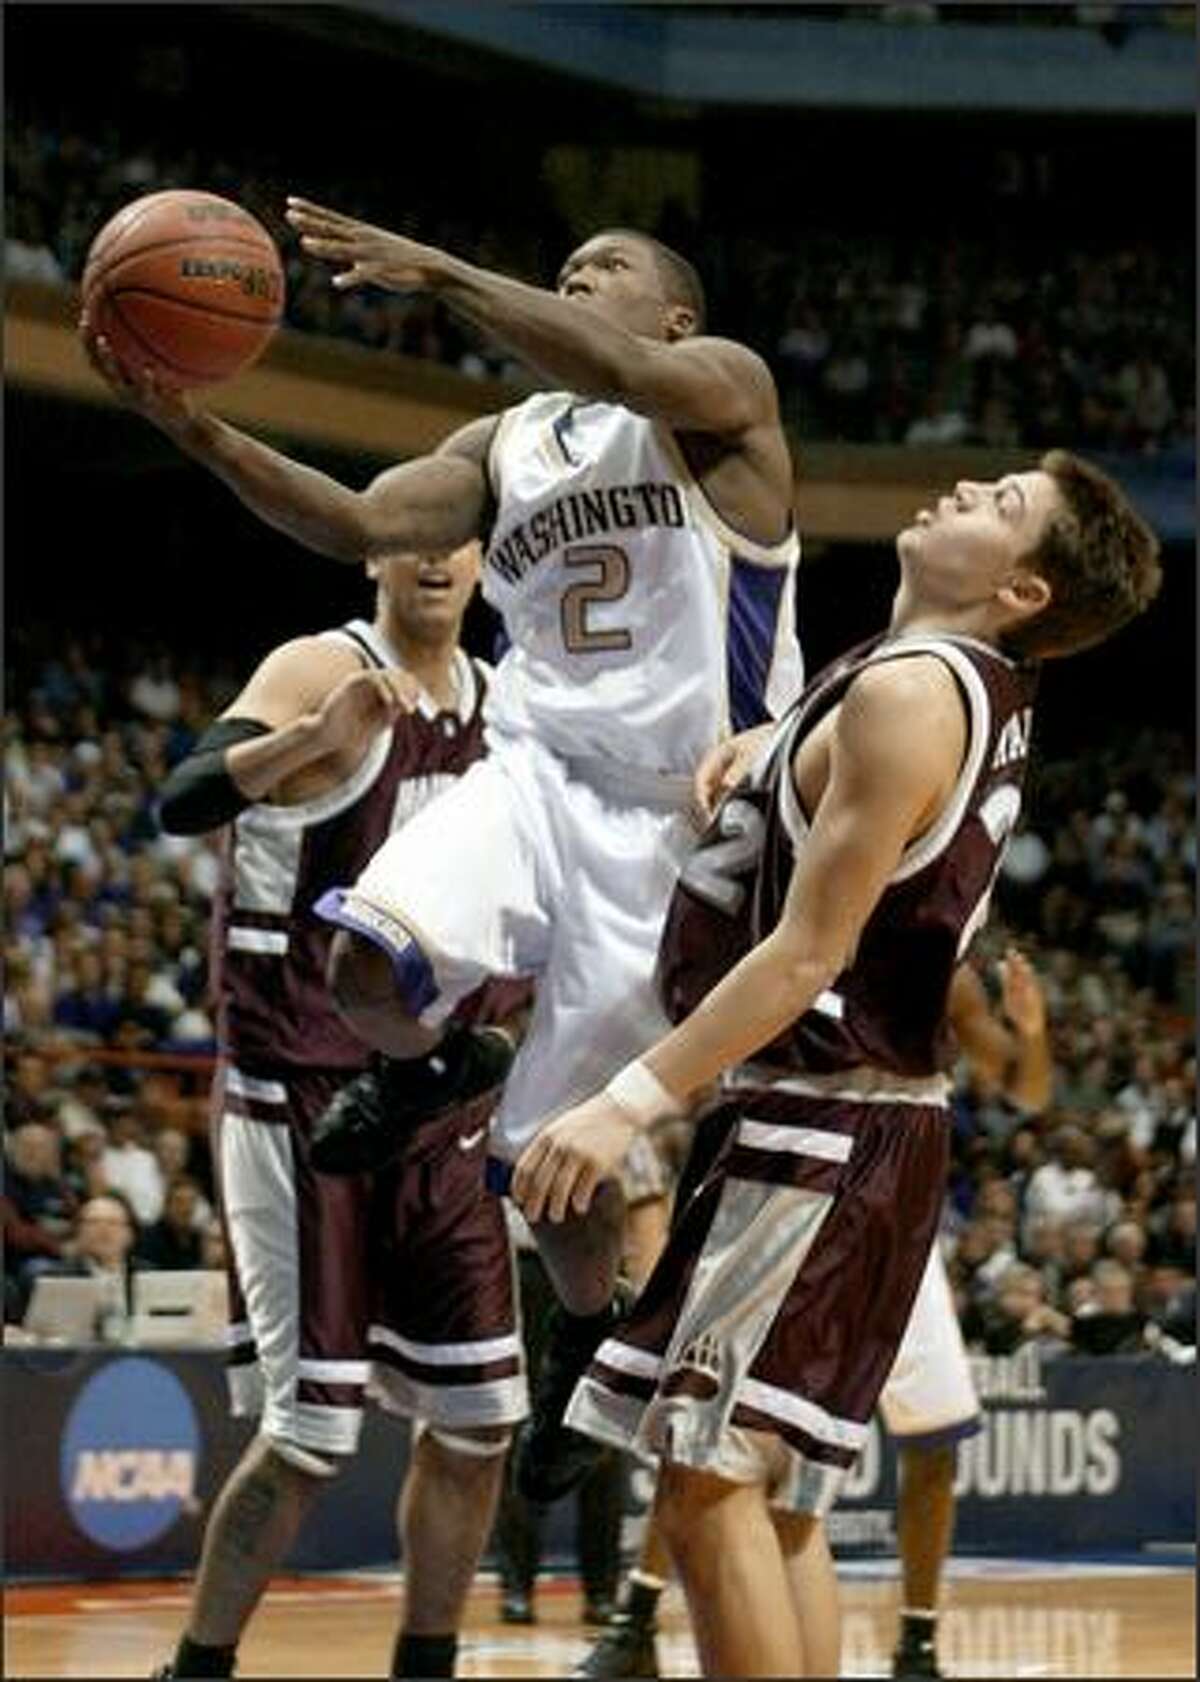 Nate Robinson (2) blows by Montana's Matt Martin, right, in the first half of the Huskies-Montana game. Robinson was relatively quiet with just nine points but did have a team-high five assists.